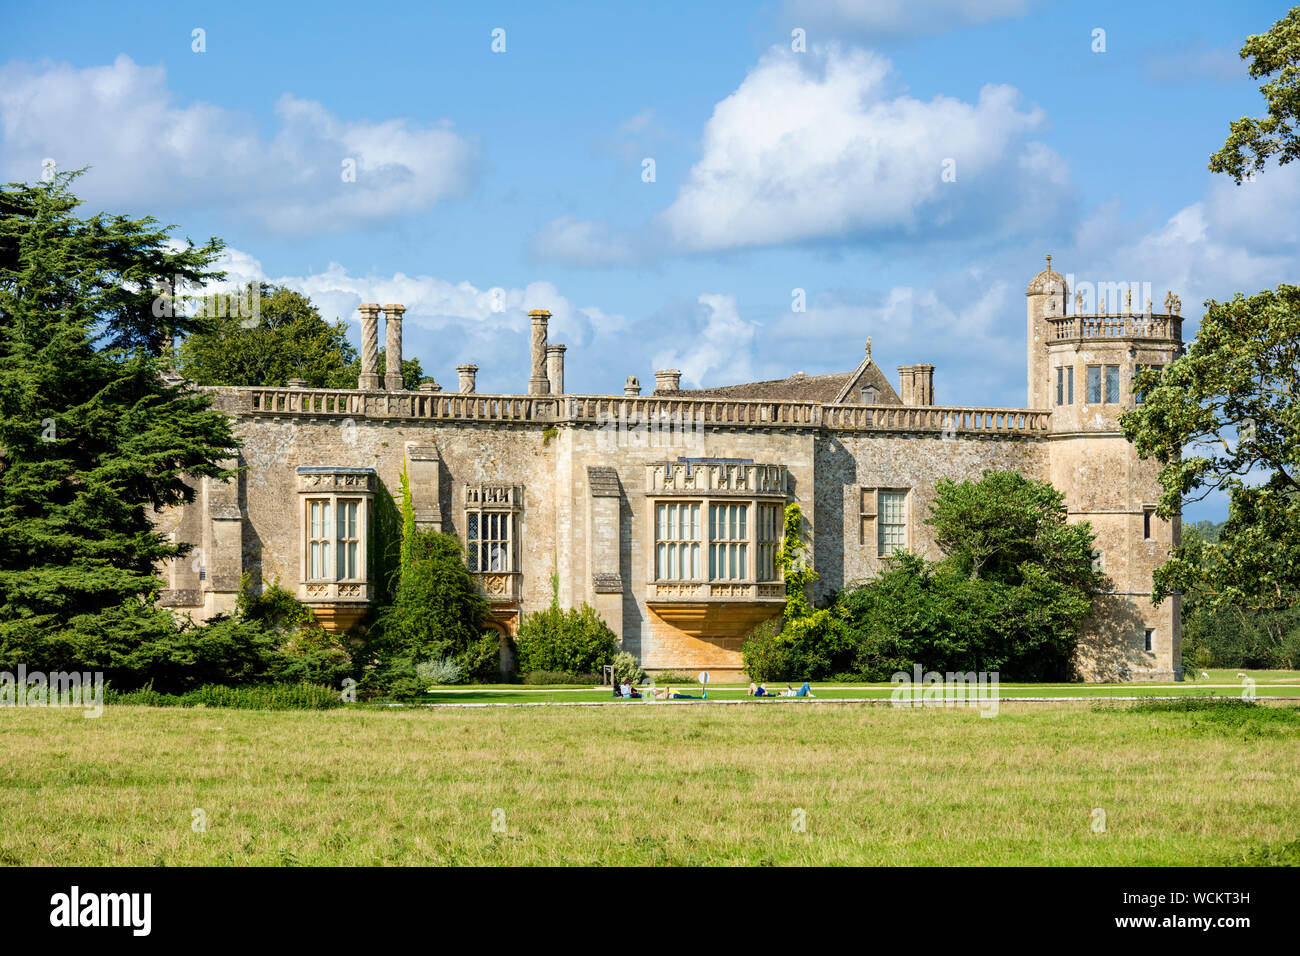 Lacock abbey in grounds William Henry Fox Talbot's country house Lacock village Wiltshire england uk gb Europe Stock Photo